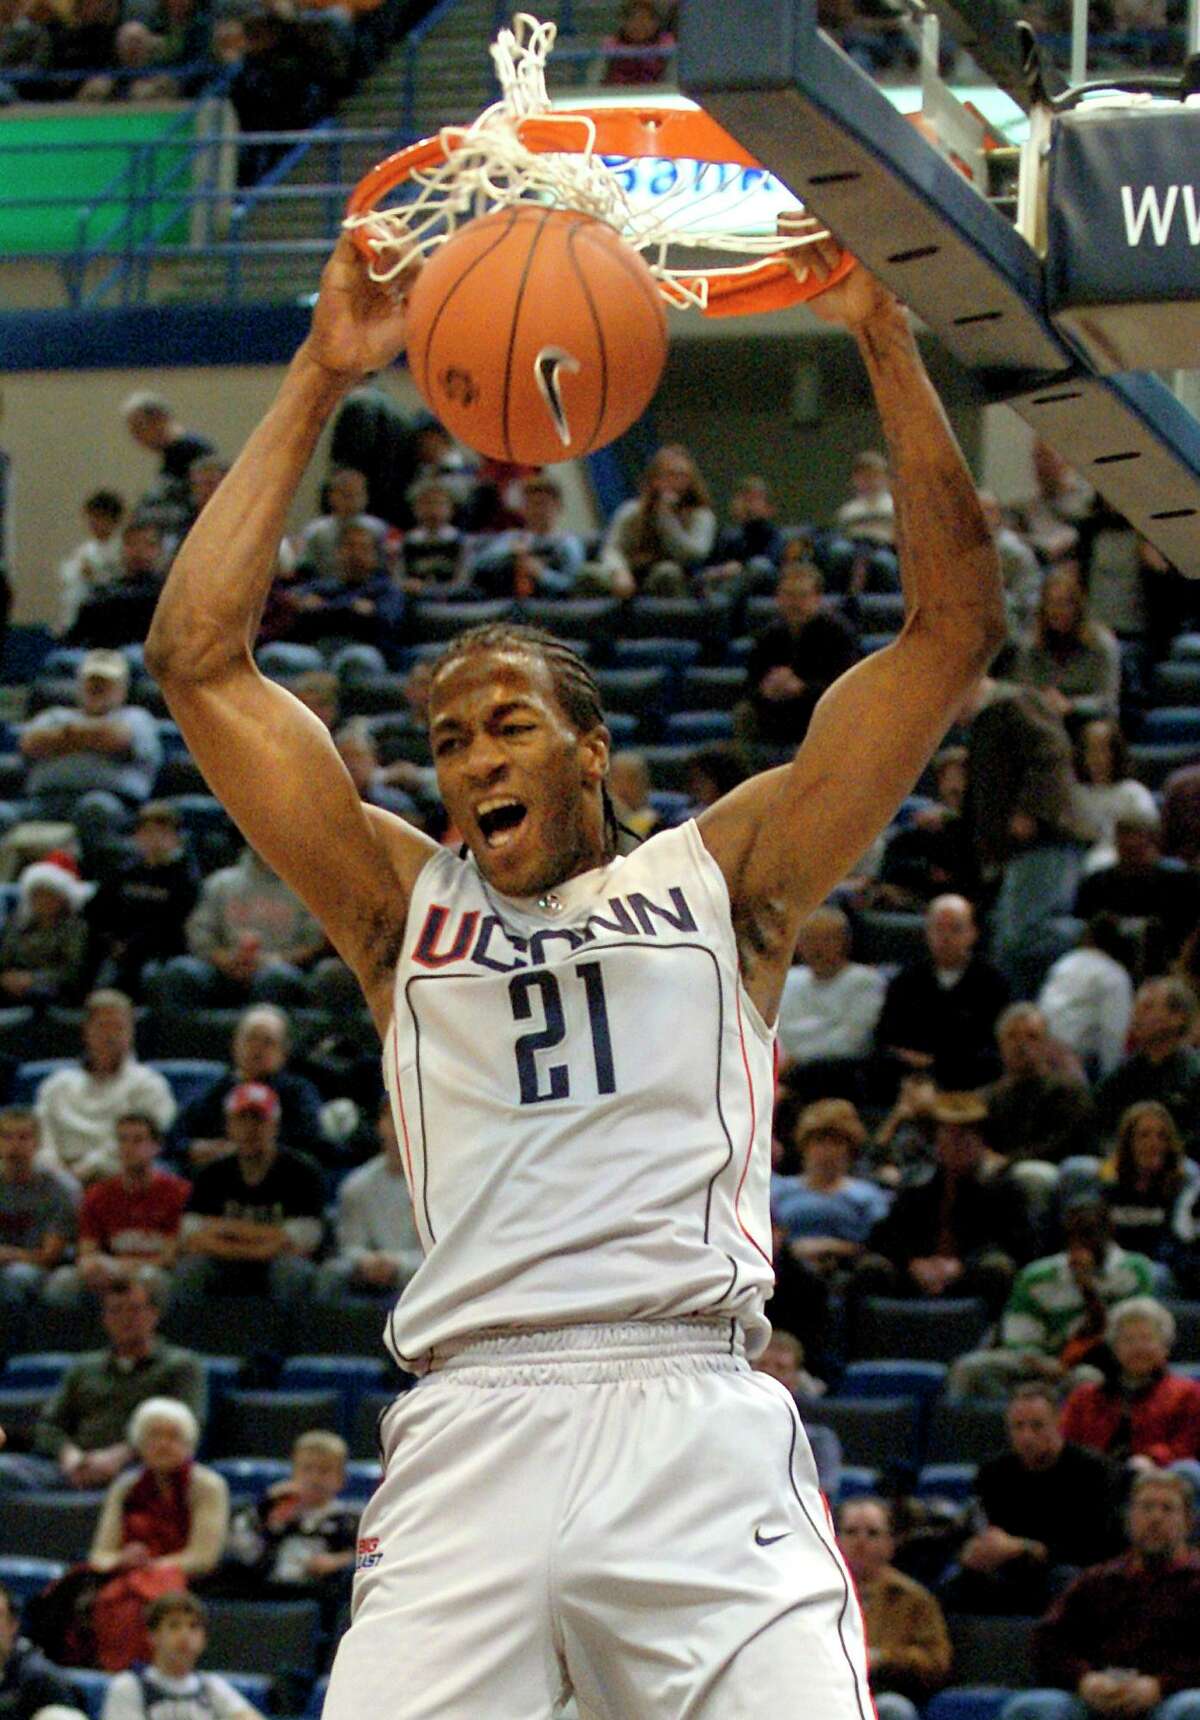 UConn’s Stanley Robinson slam dunks for two points in the first half of the college basketball game against Maine in Hartford, Conn., Saturday, Dec. 22, 2007. Robinson scored a career high 32 points.